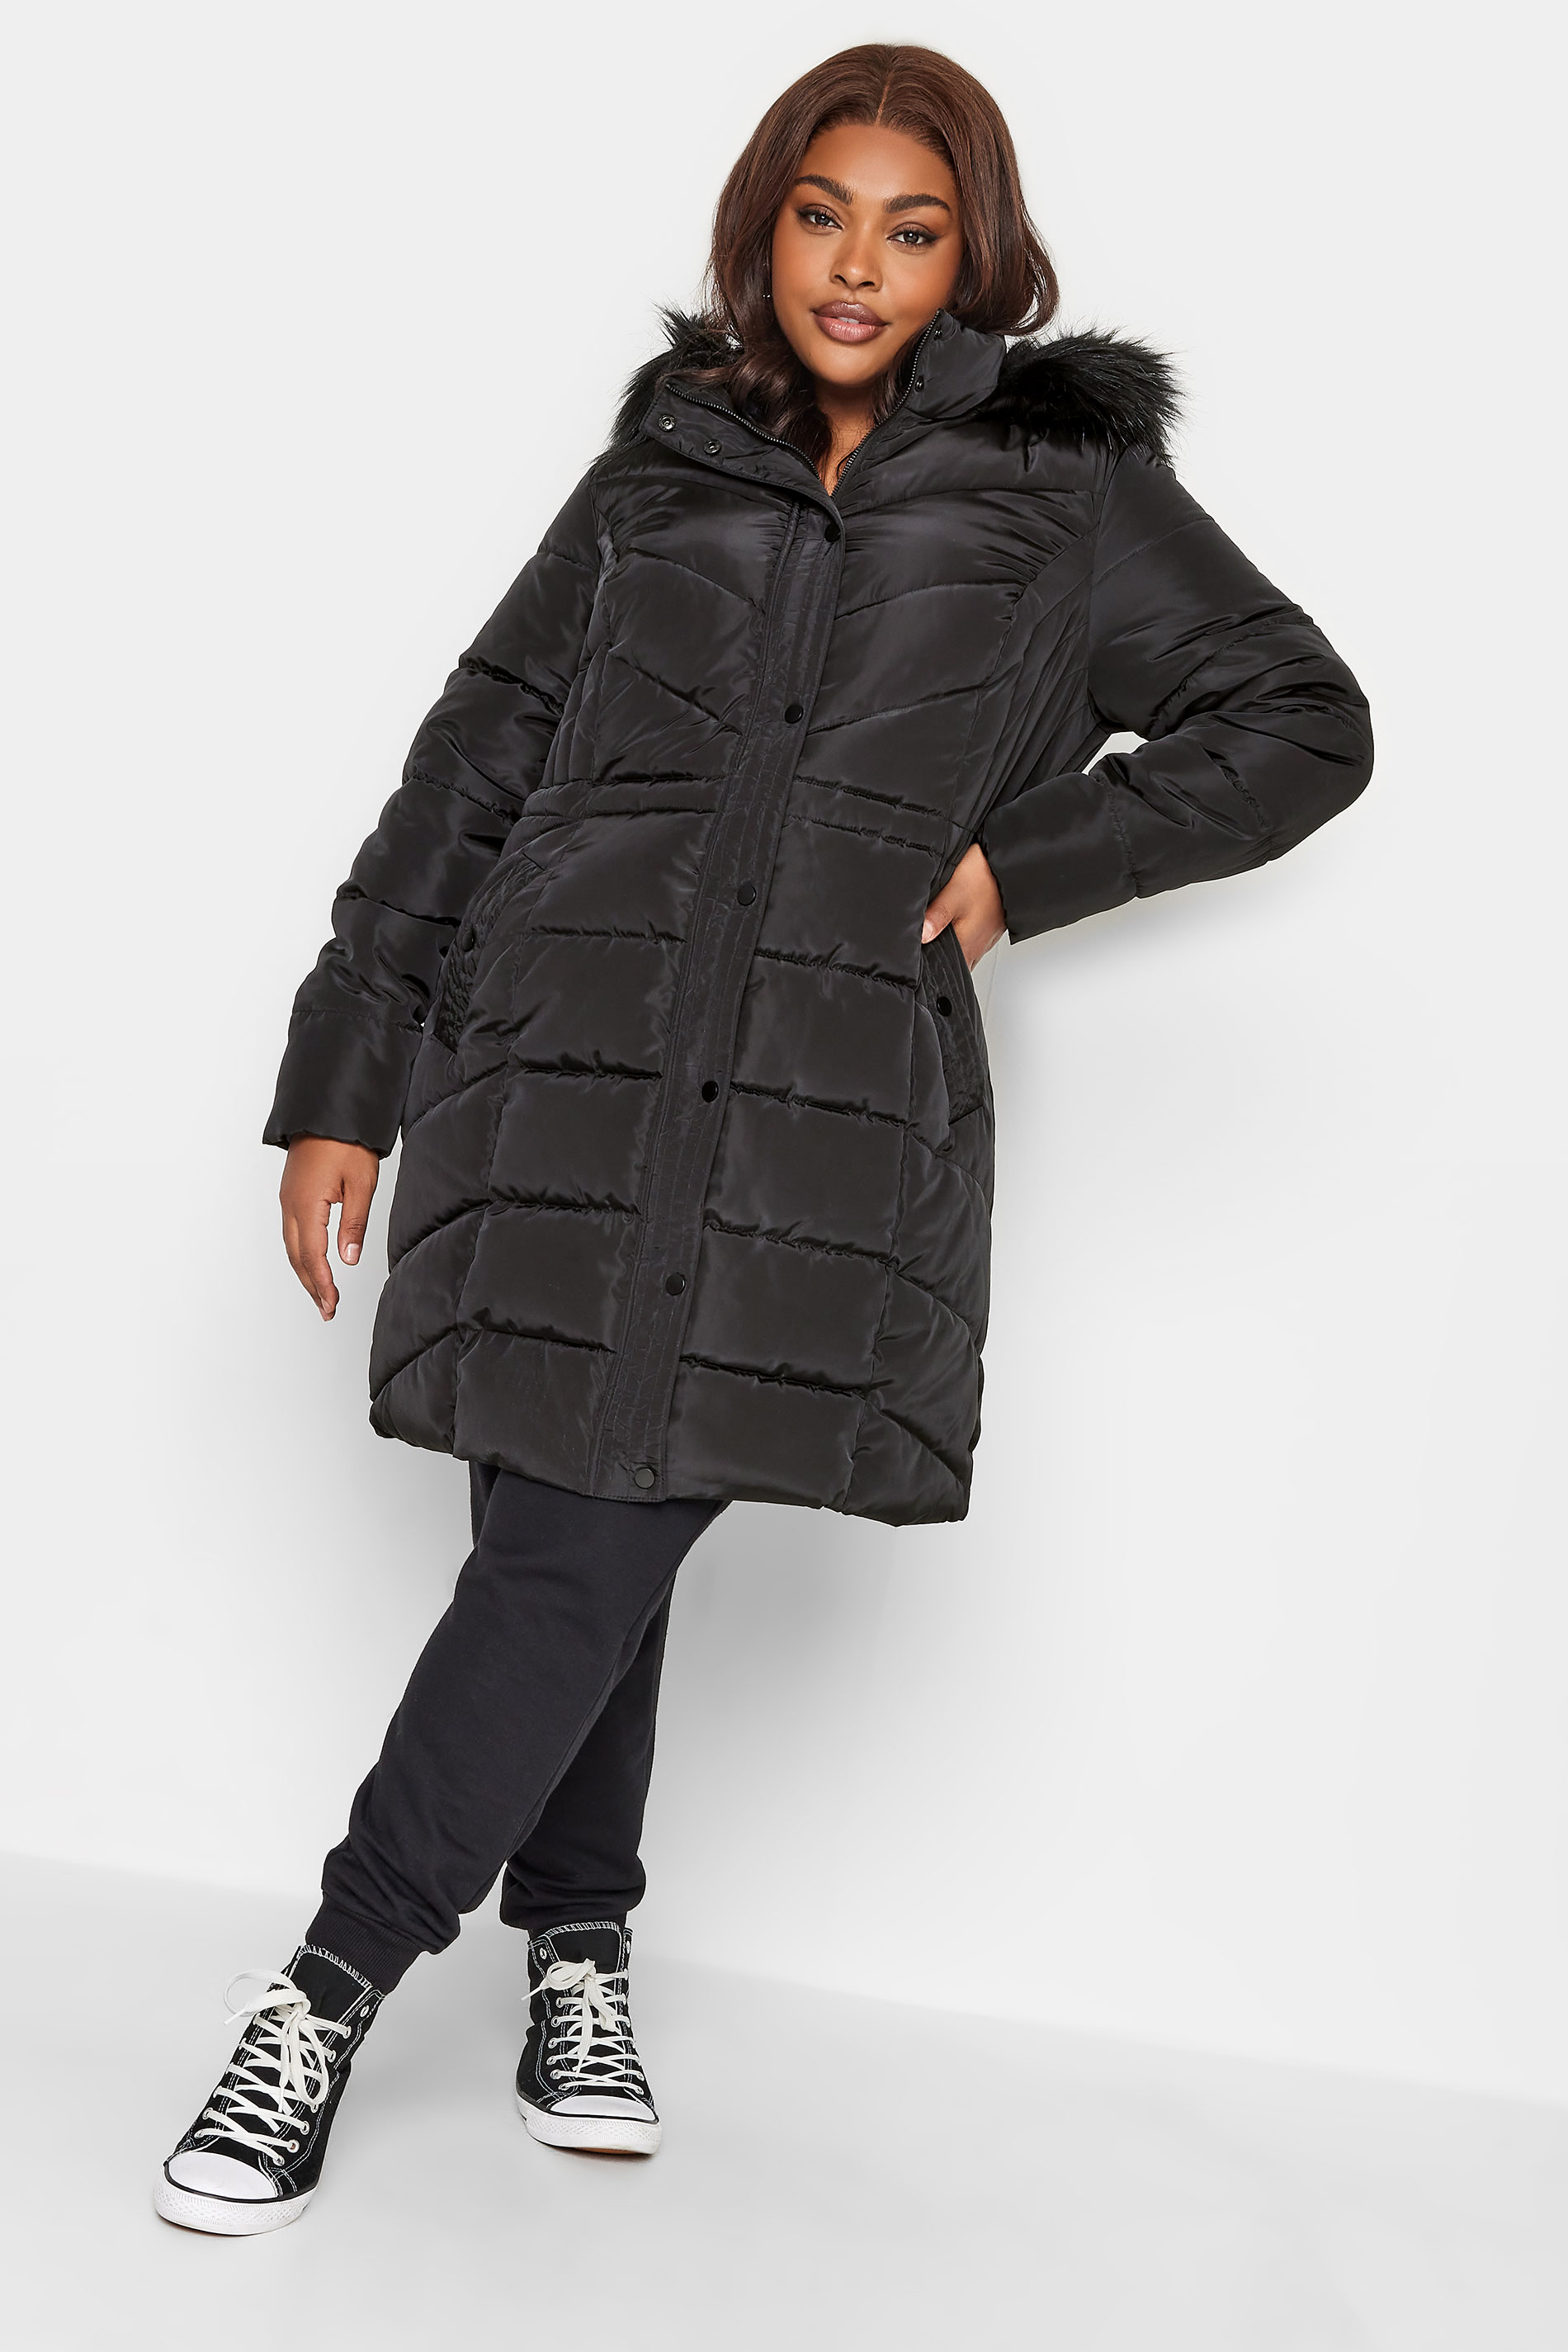 Yours Curve Black Midi Puffer Coat, Women's Curve & Plus Size, Yours product